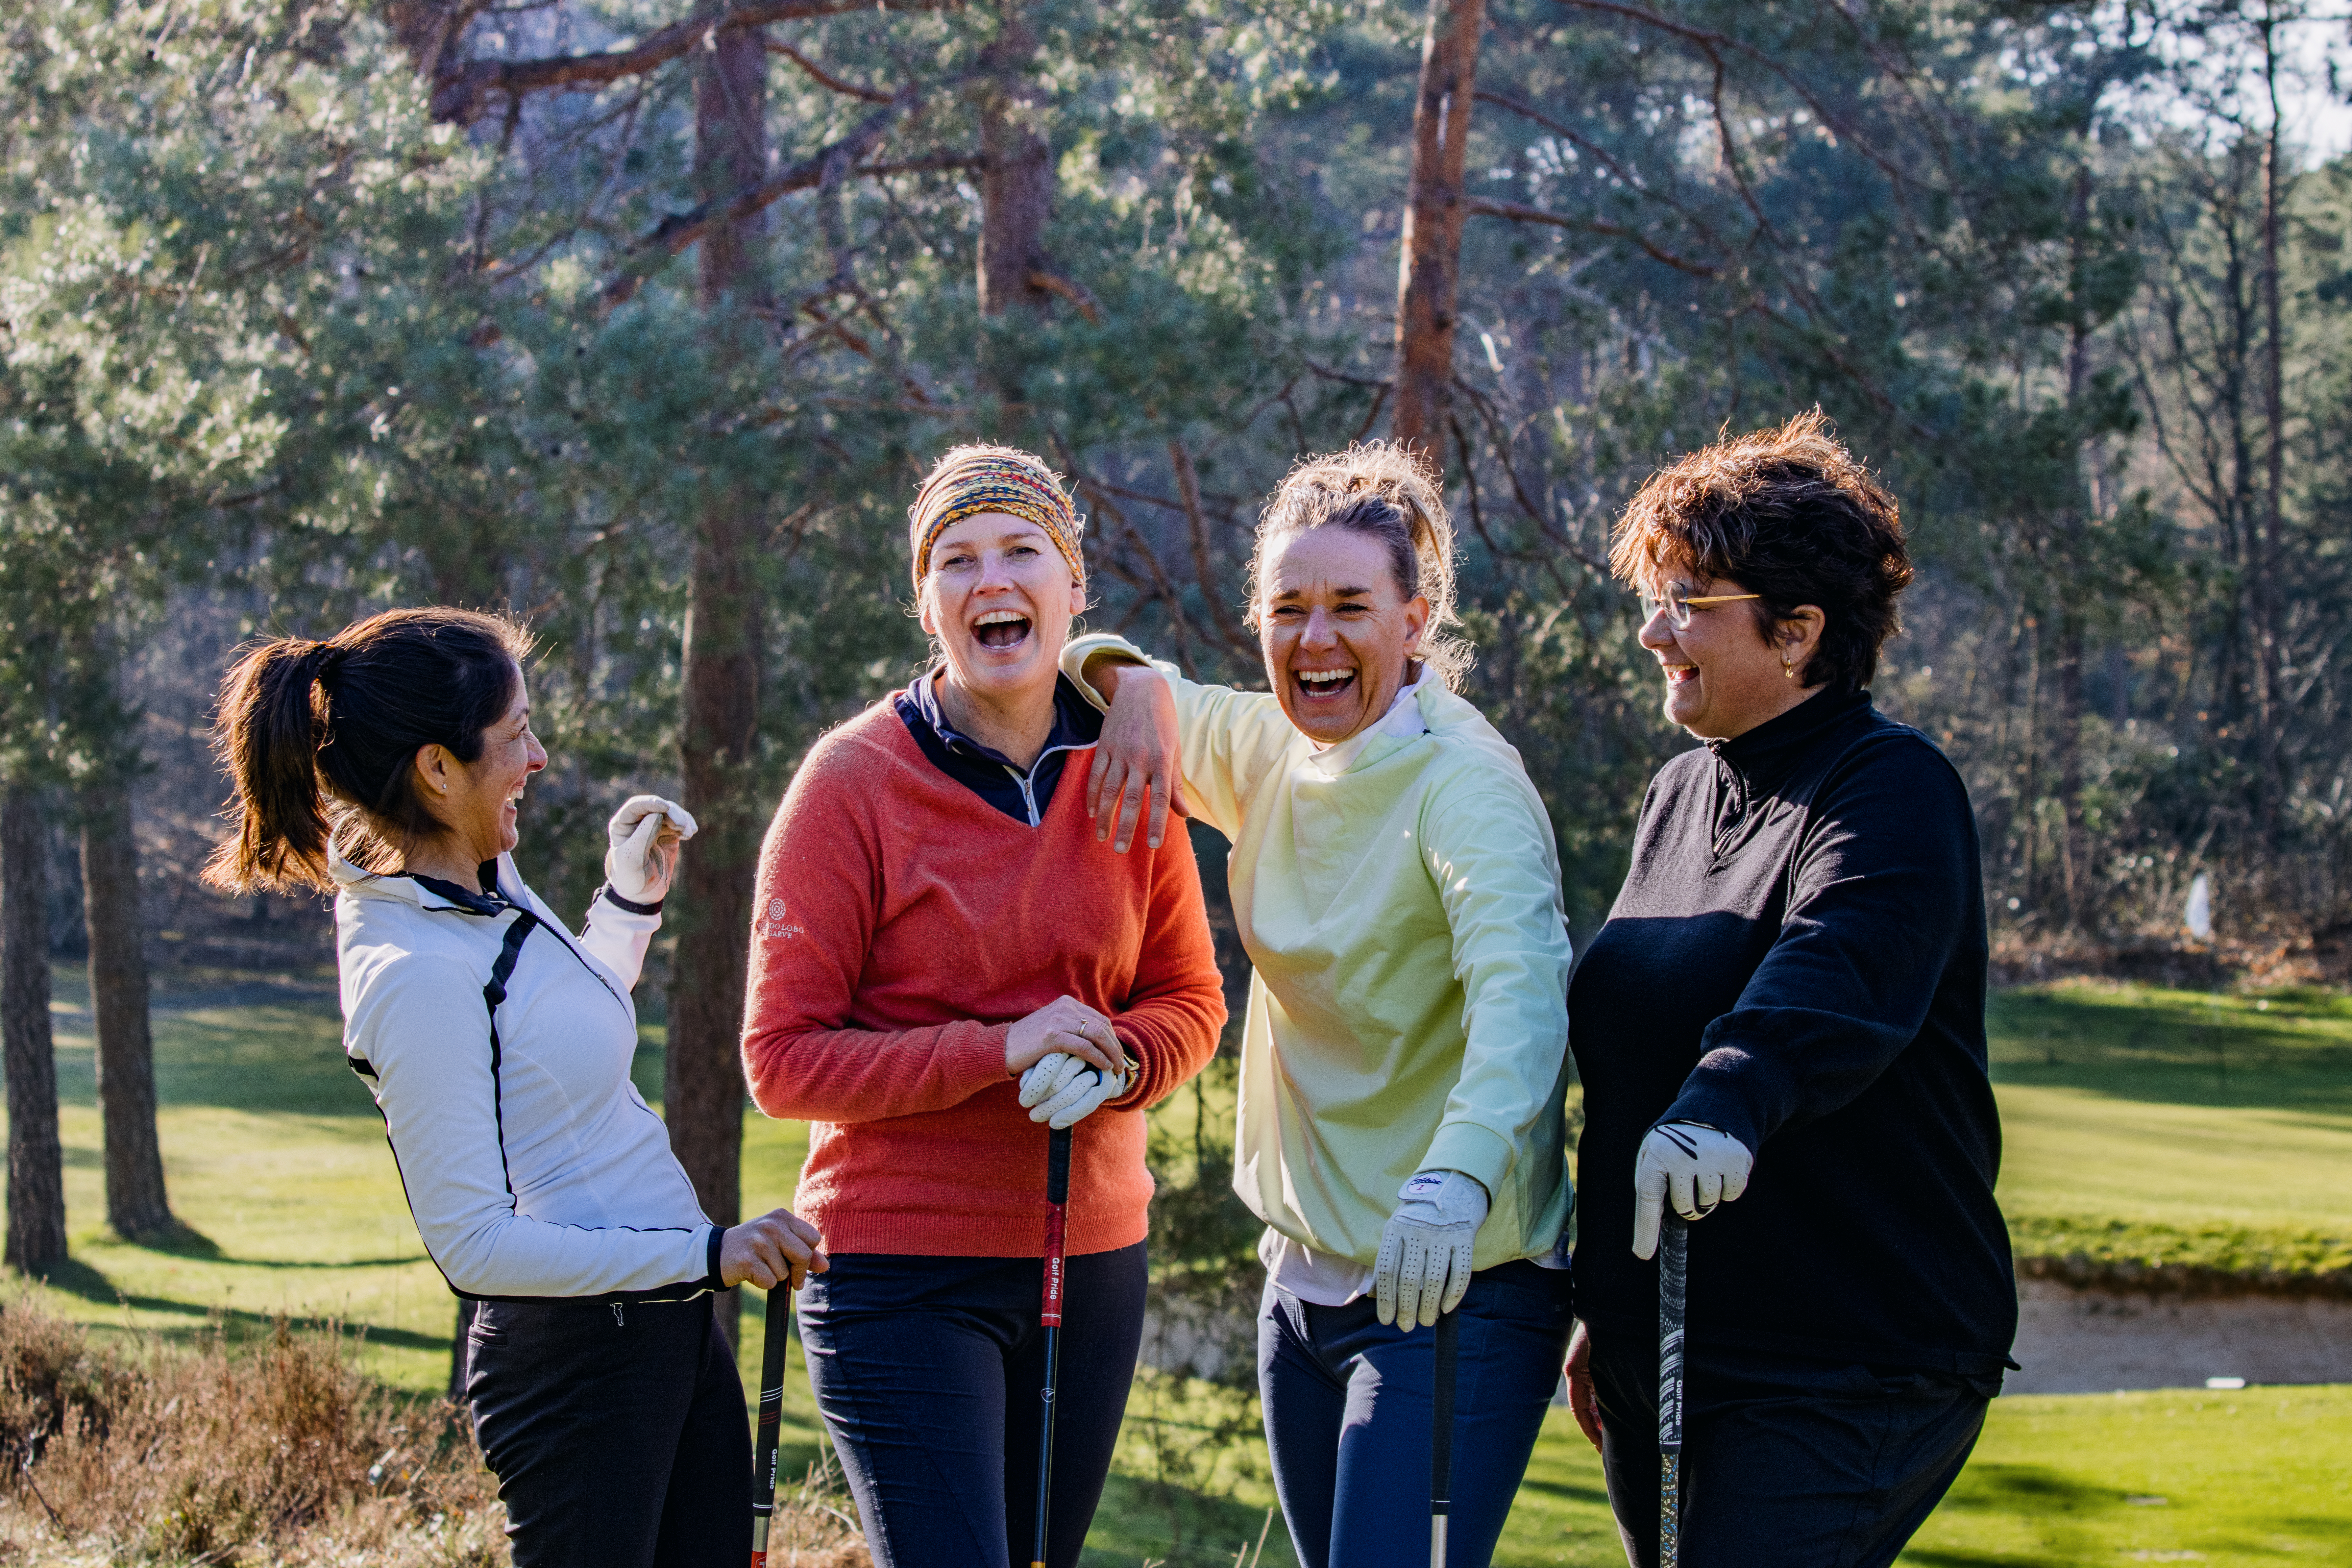 Female golfers laughing on the course. Photo: Renate Roeleveld.